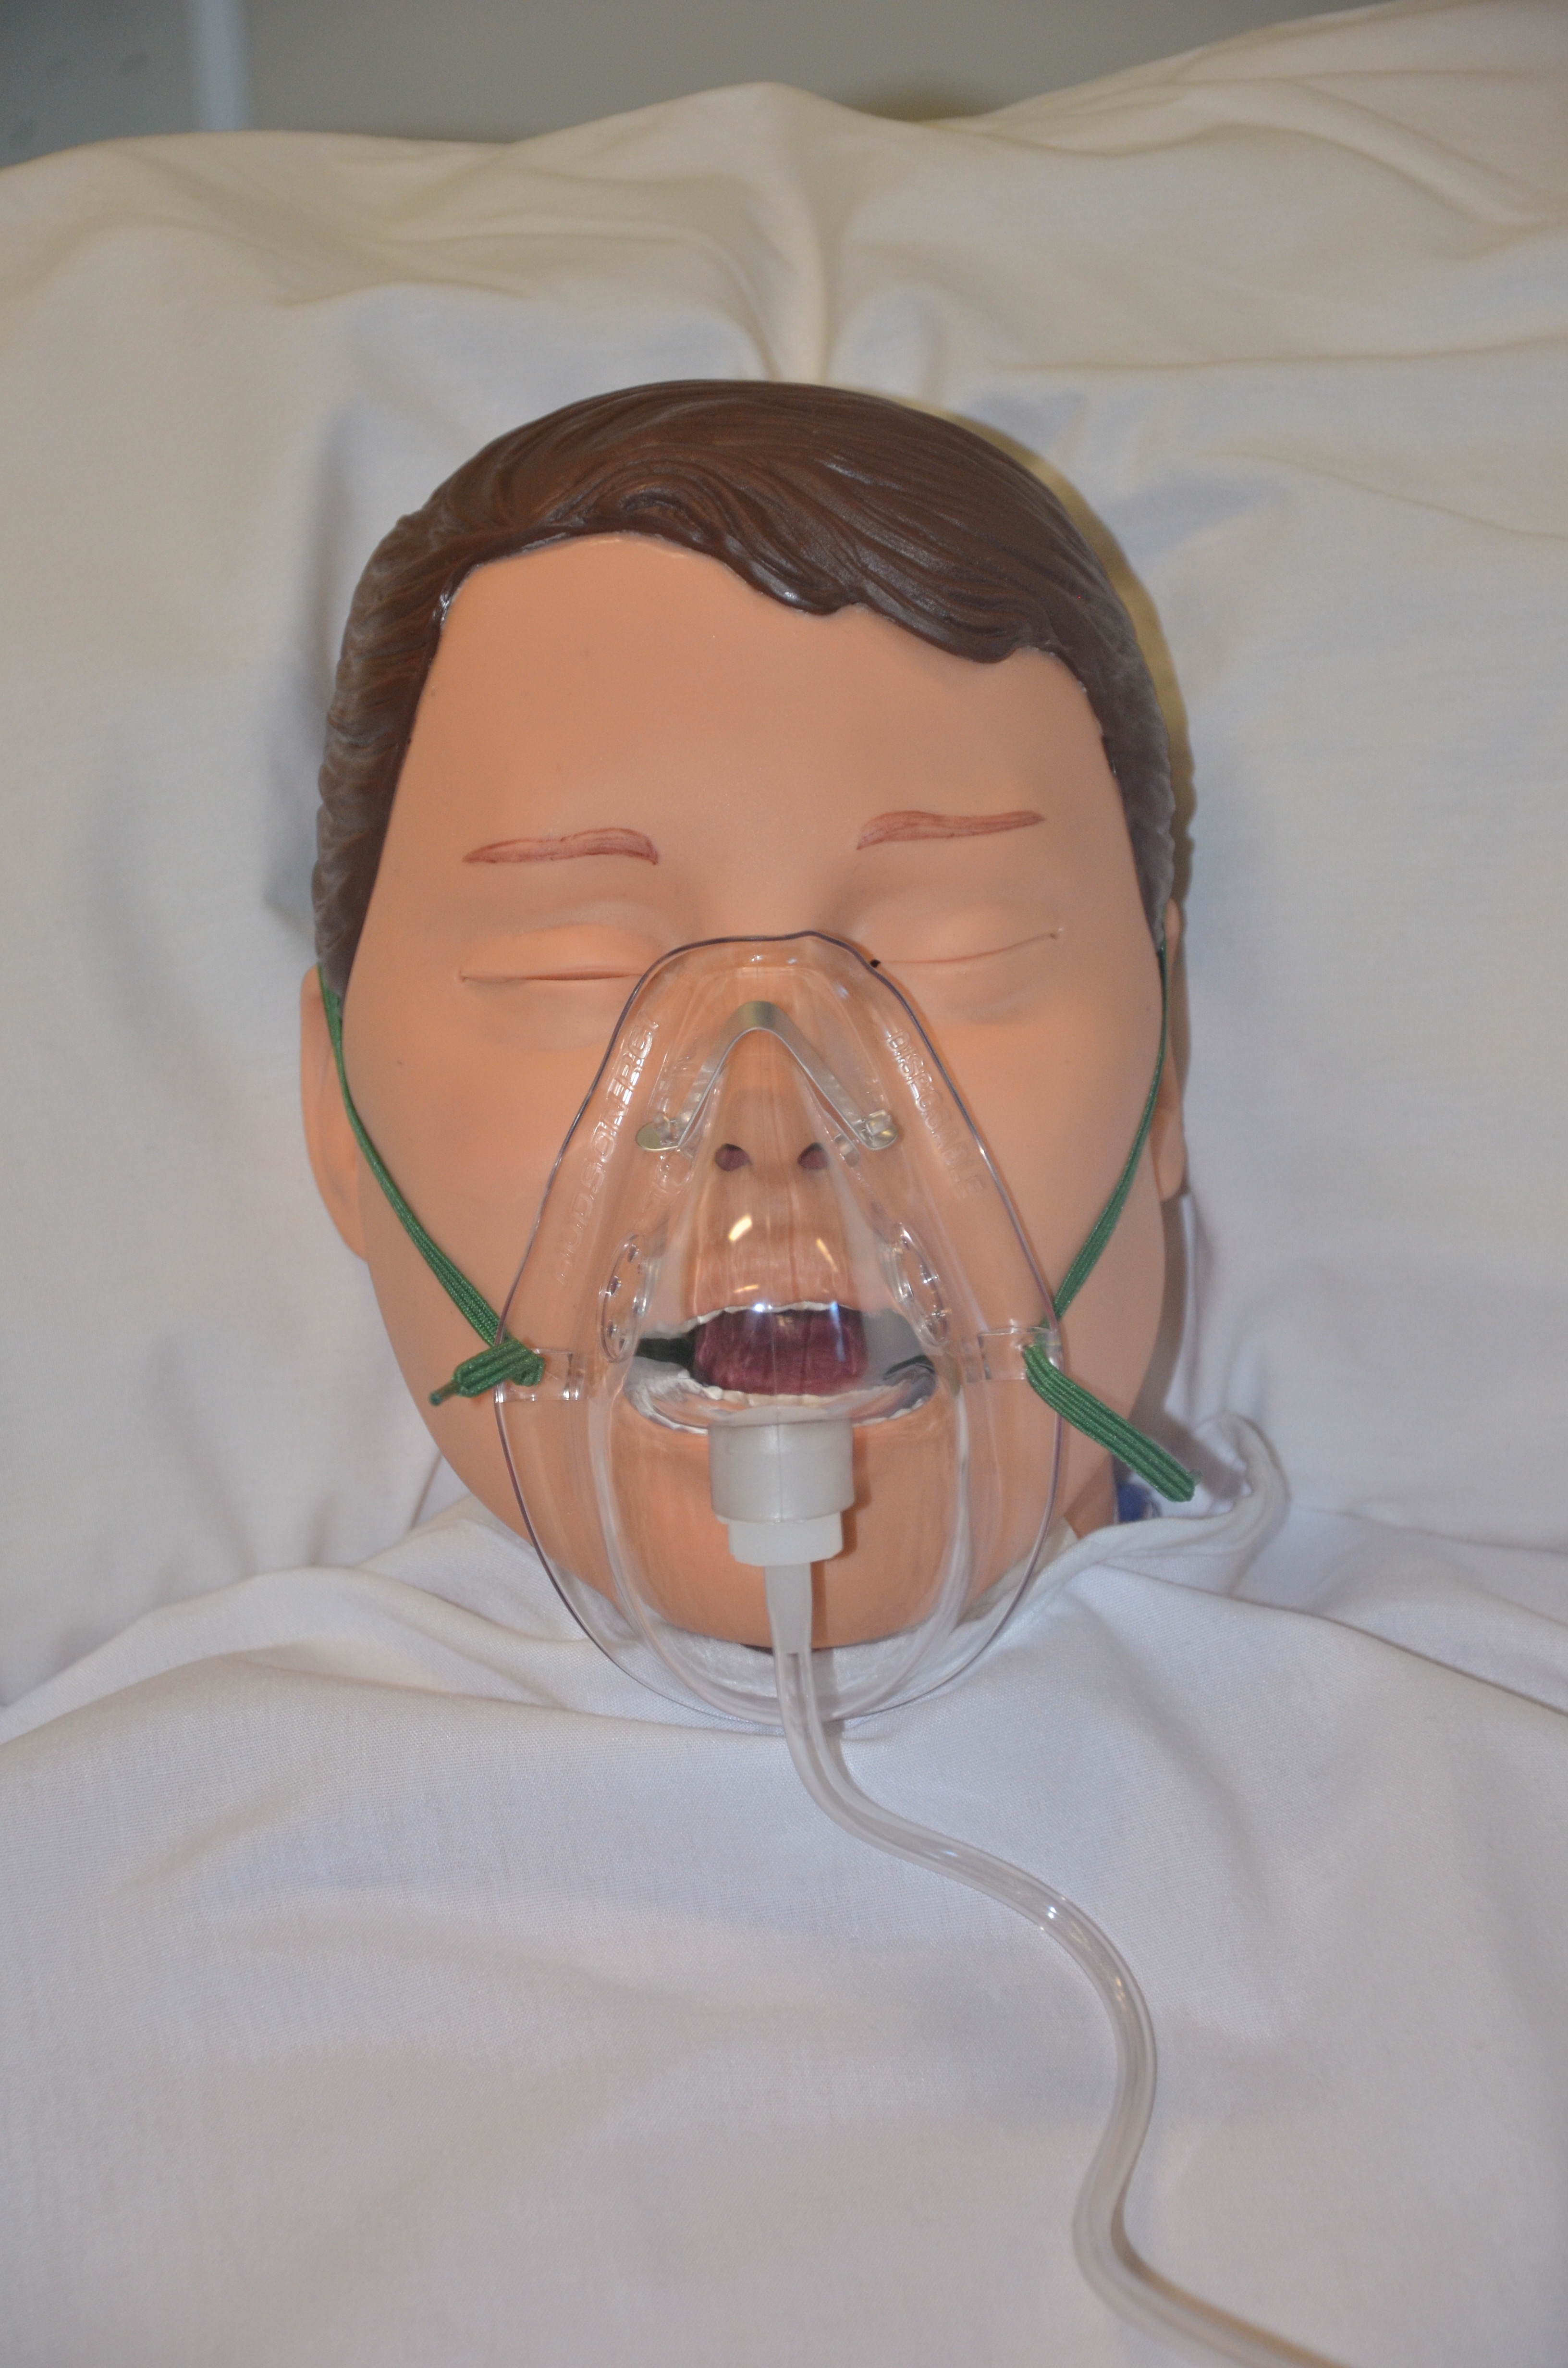 5.5 Oxygen Therapy Systems Clinical Procedures for Patient Care